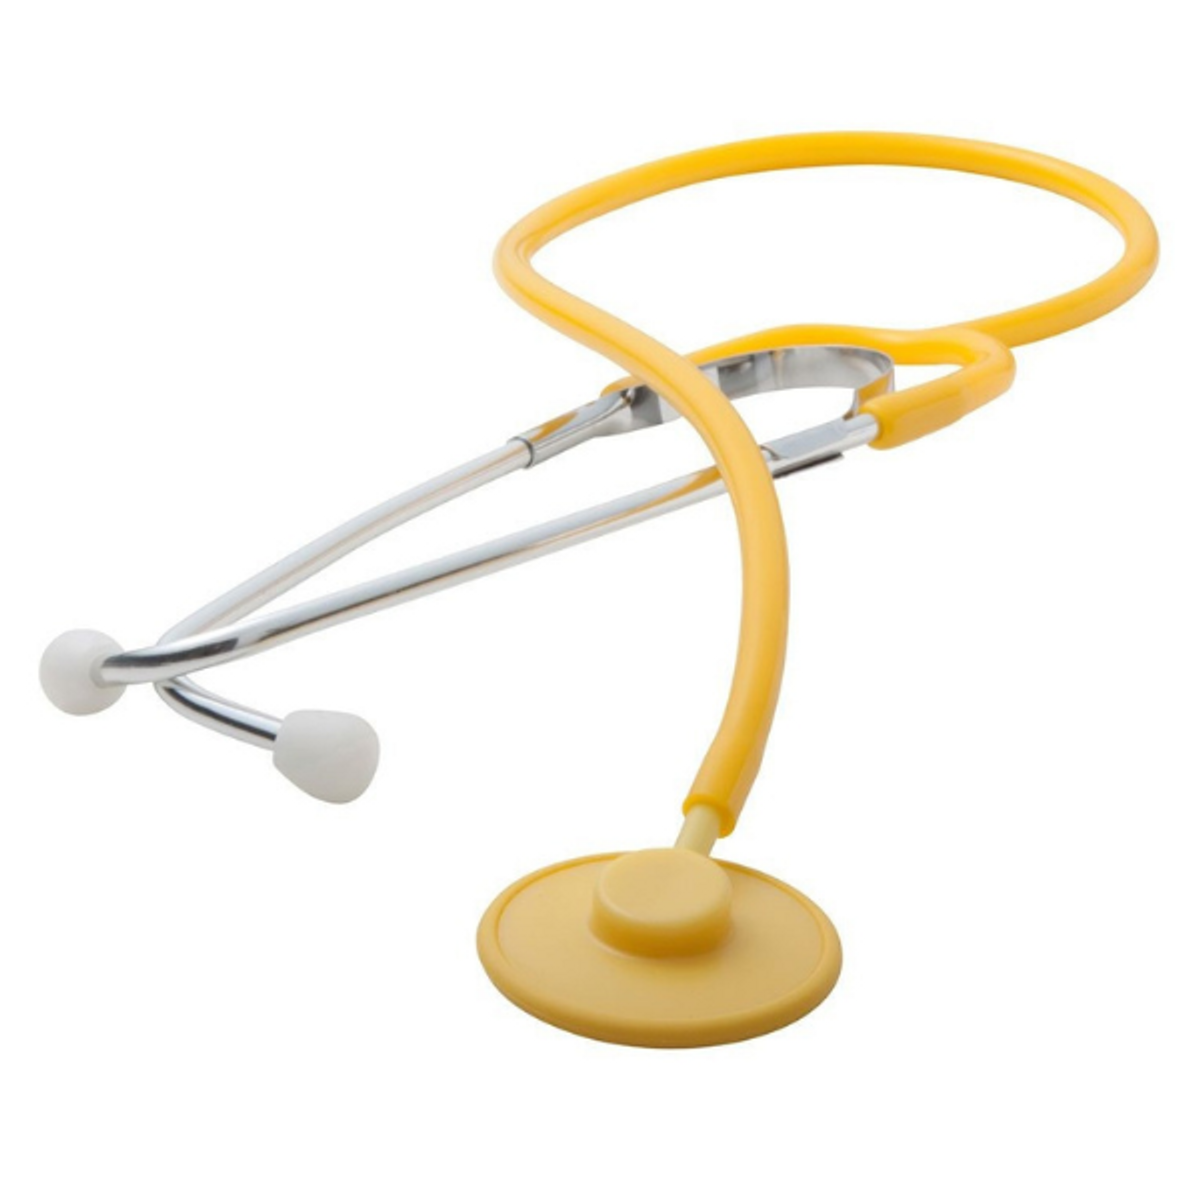 ADC Proscope 664y Disposable Stethoscope